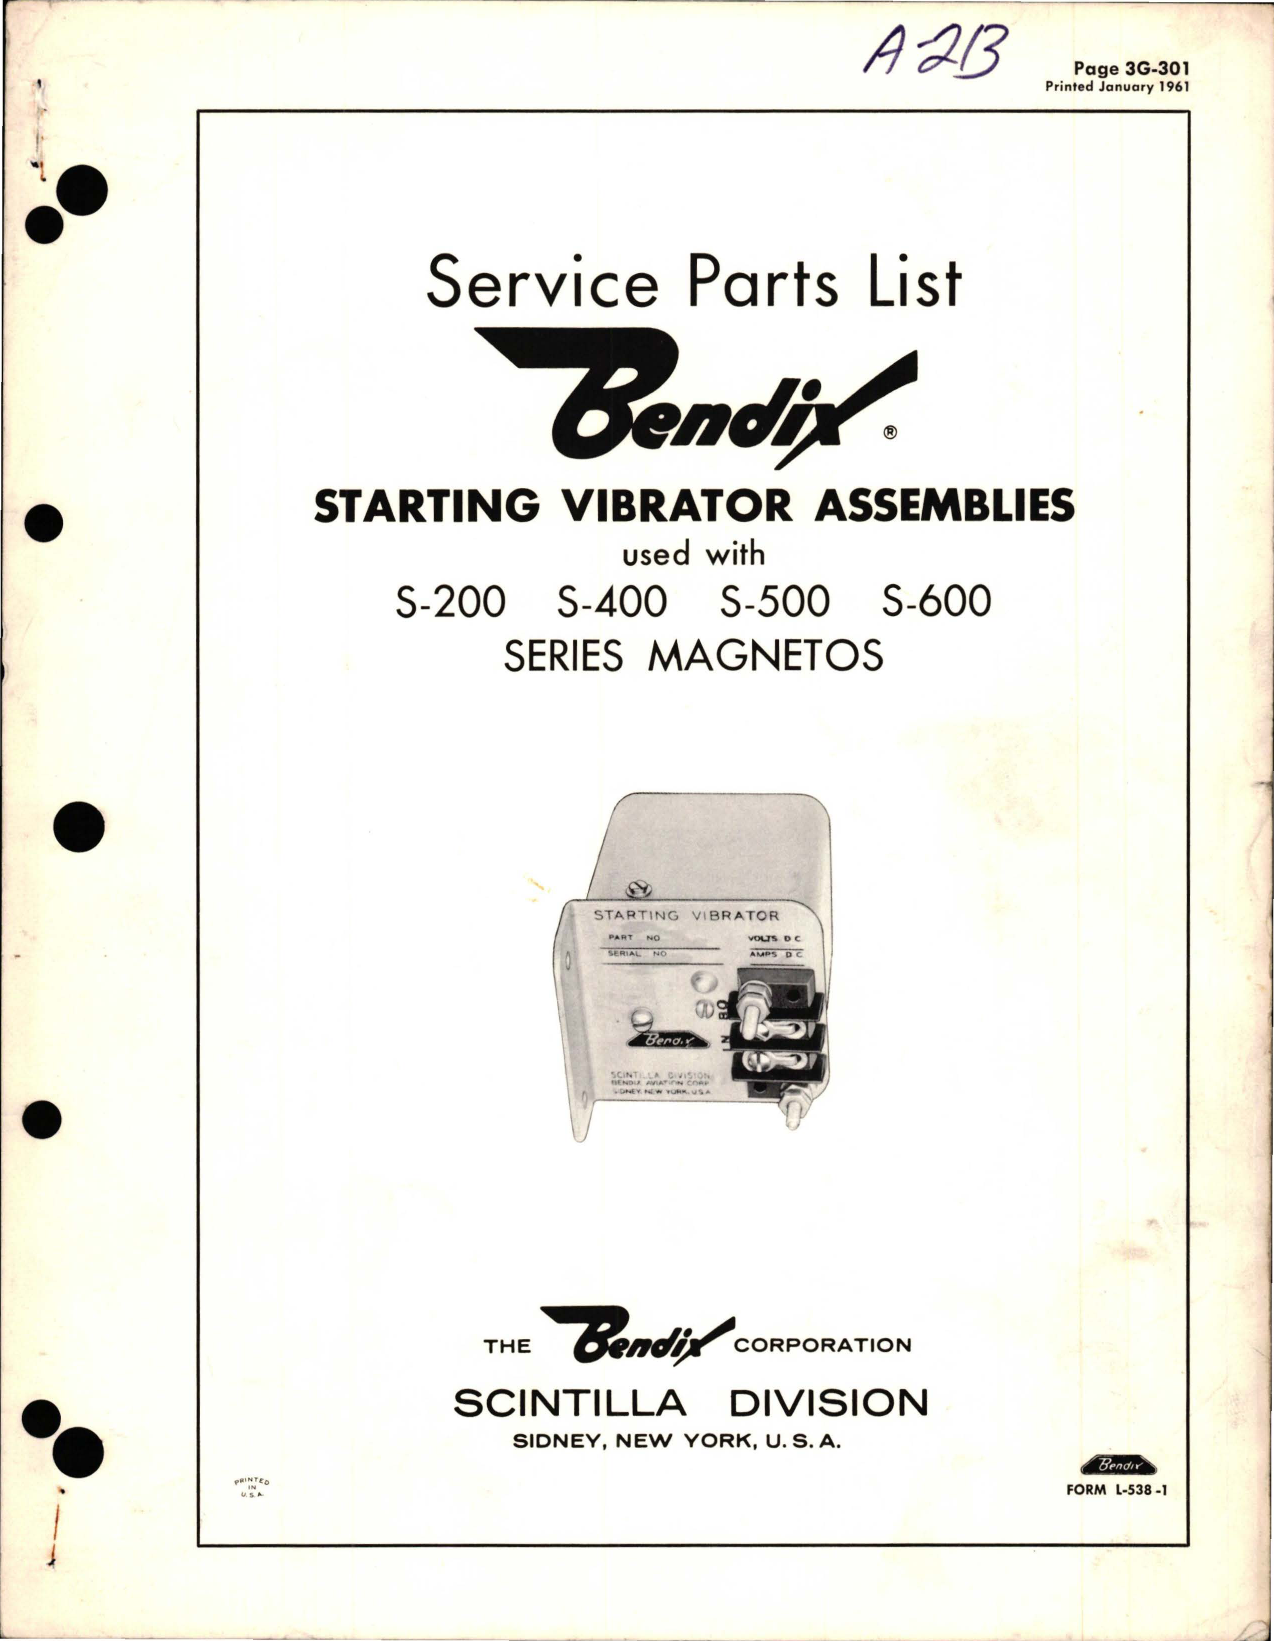 Sample page 1 from AirCorps Library document: Service Parts List for Starting Vibrator Assembly used with S-200, S-400, S-500, and S-600 Series Magnetos